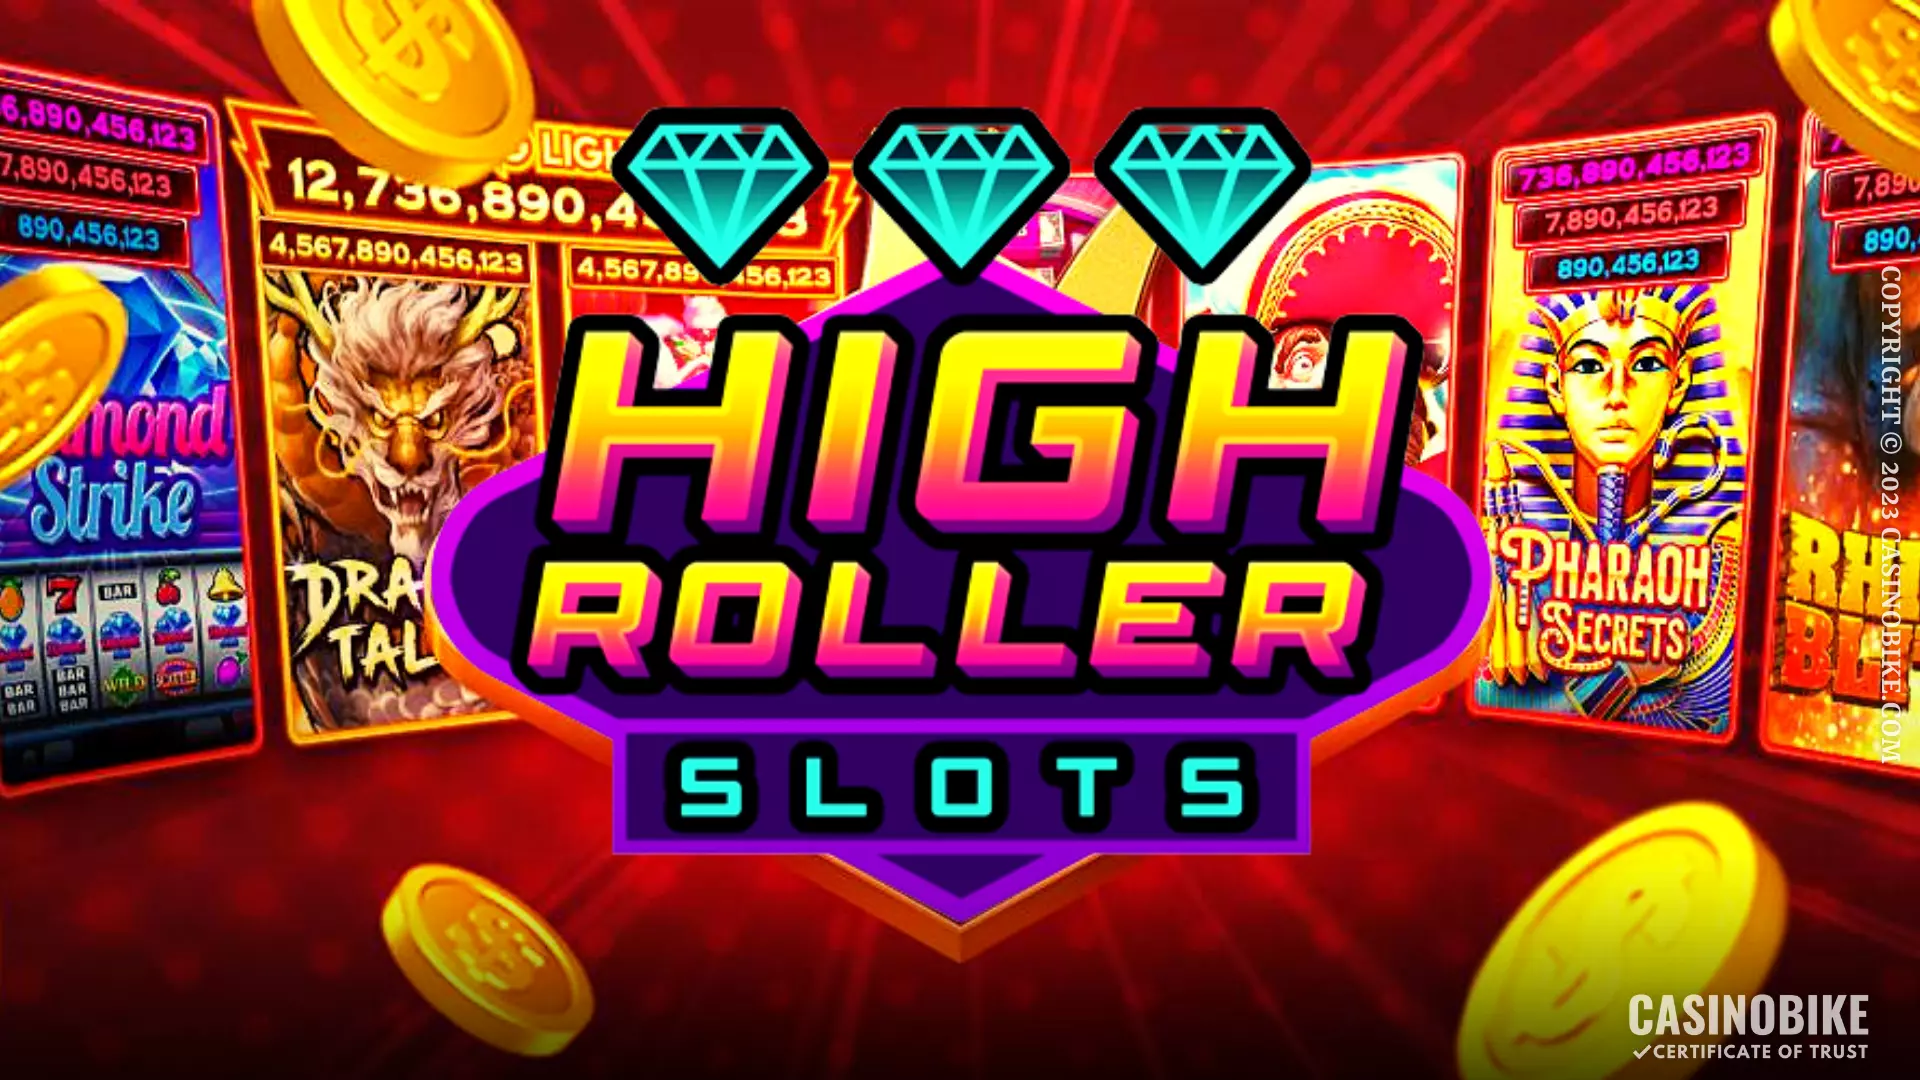 Online High Roller Slots. Maximizing Your Winnings: Strategies for USA High Roller Slot Players